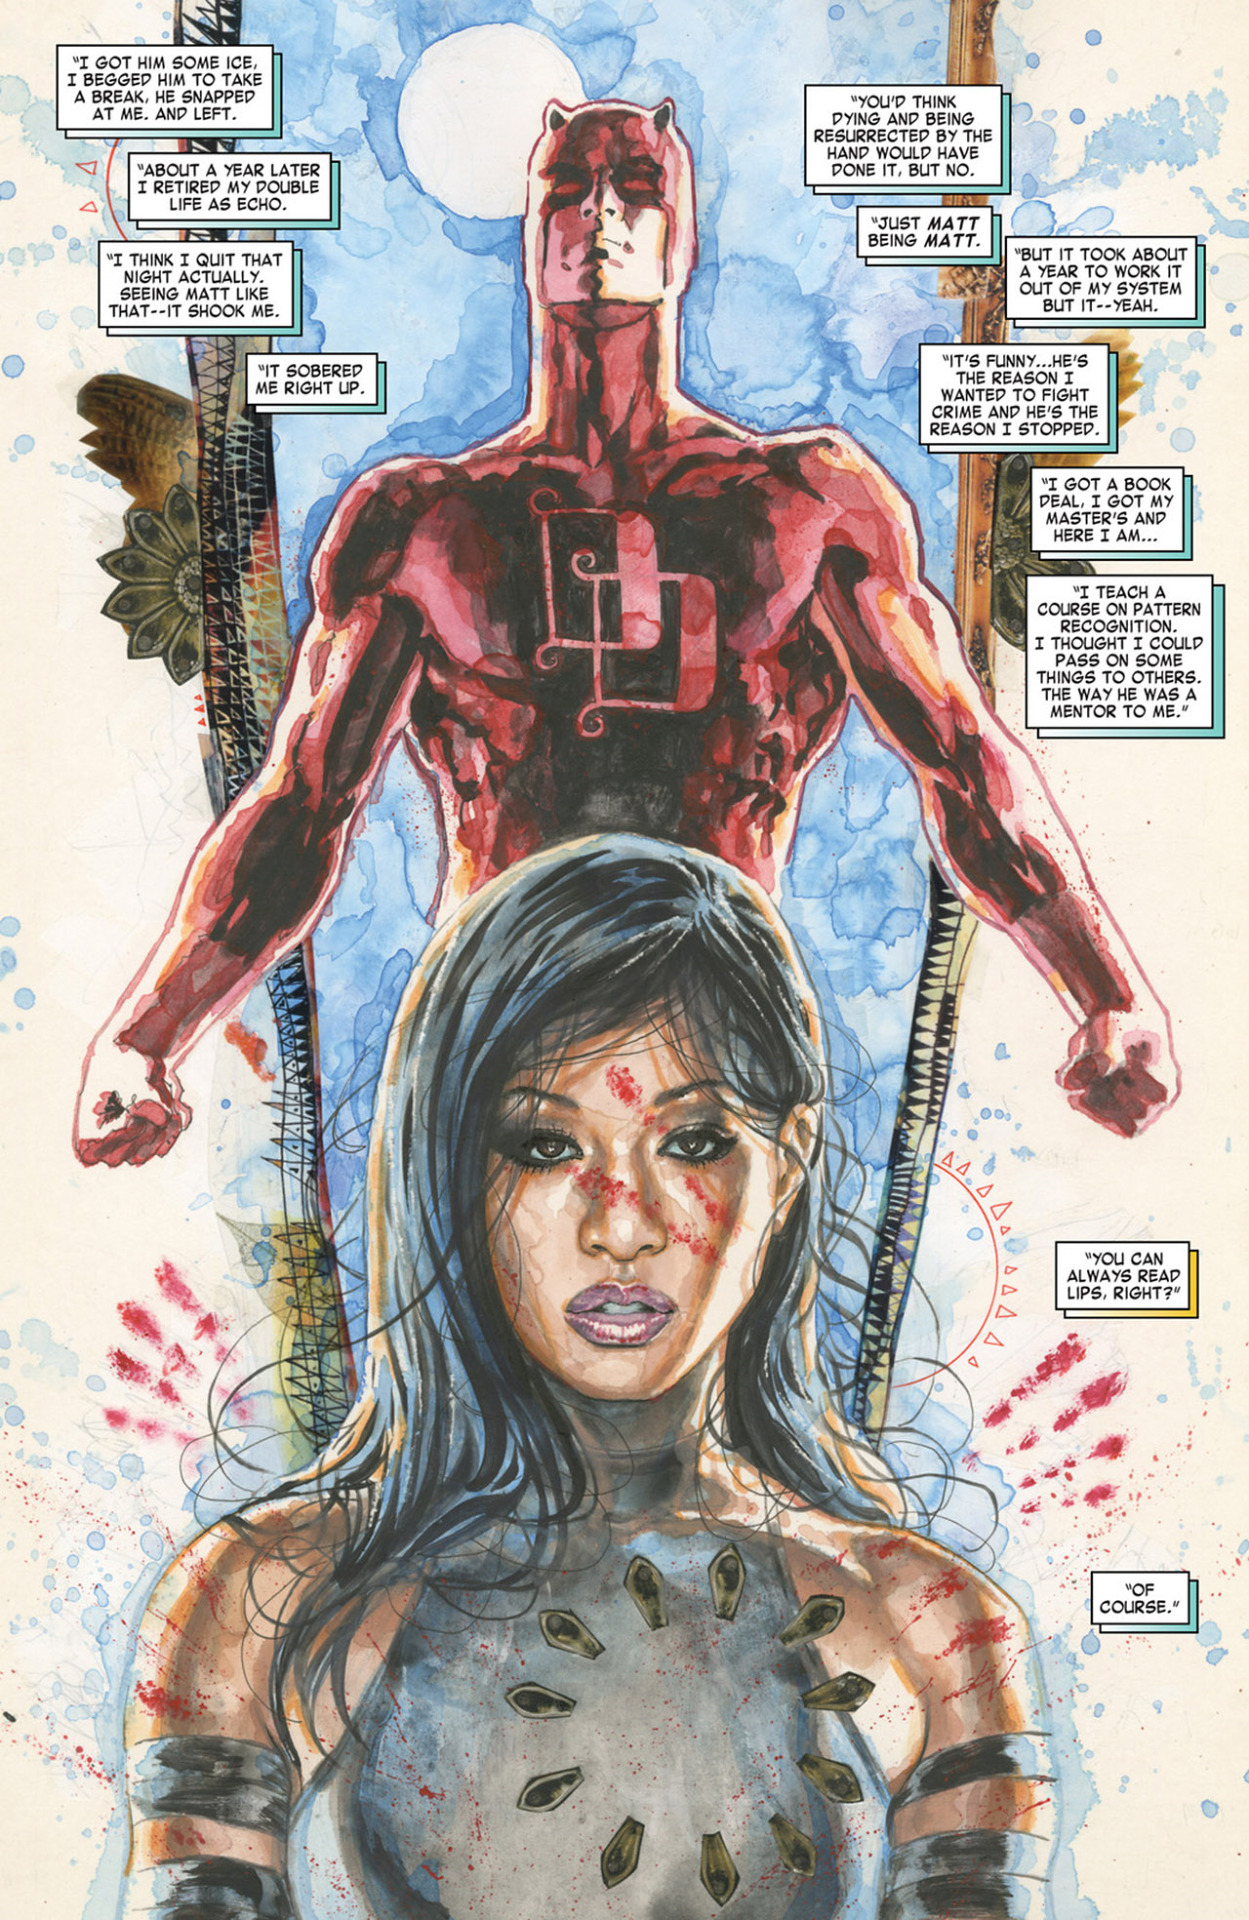 thebendisageofcomics:  Daredevil and Echo by David Mack (Daredevil: End of Days #3,